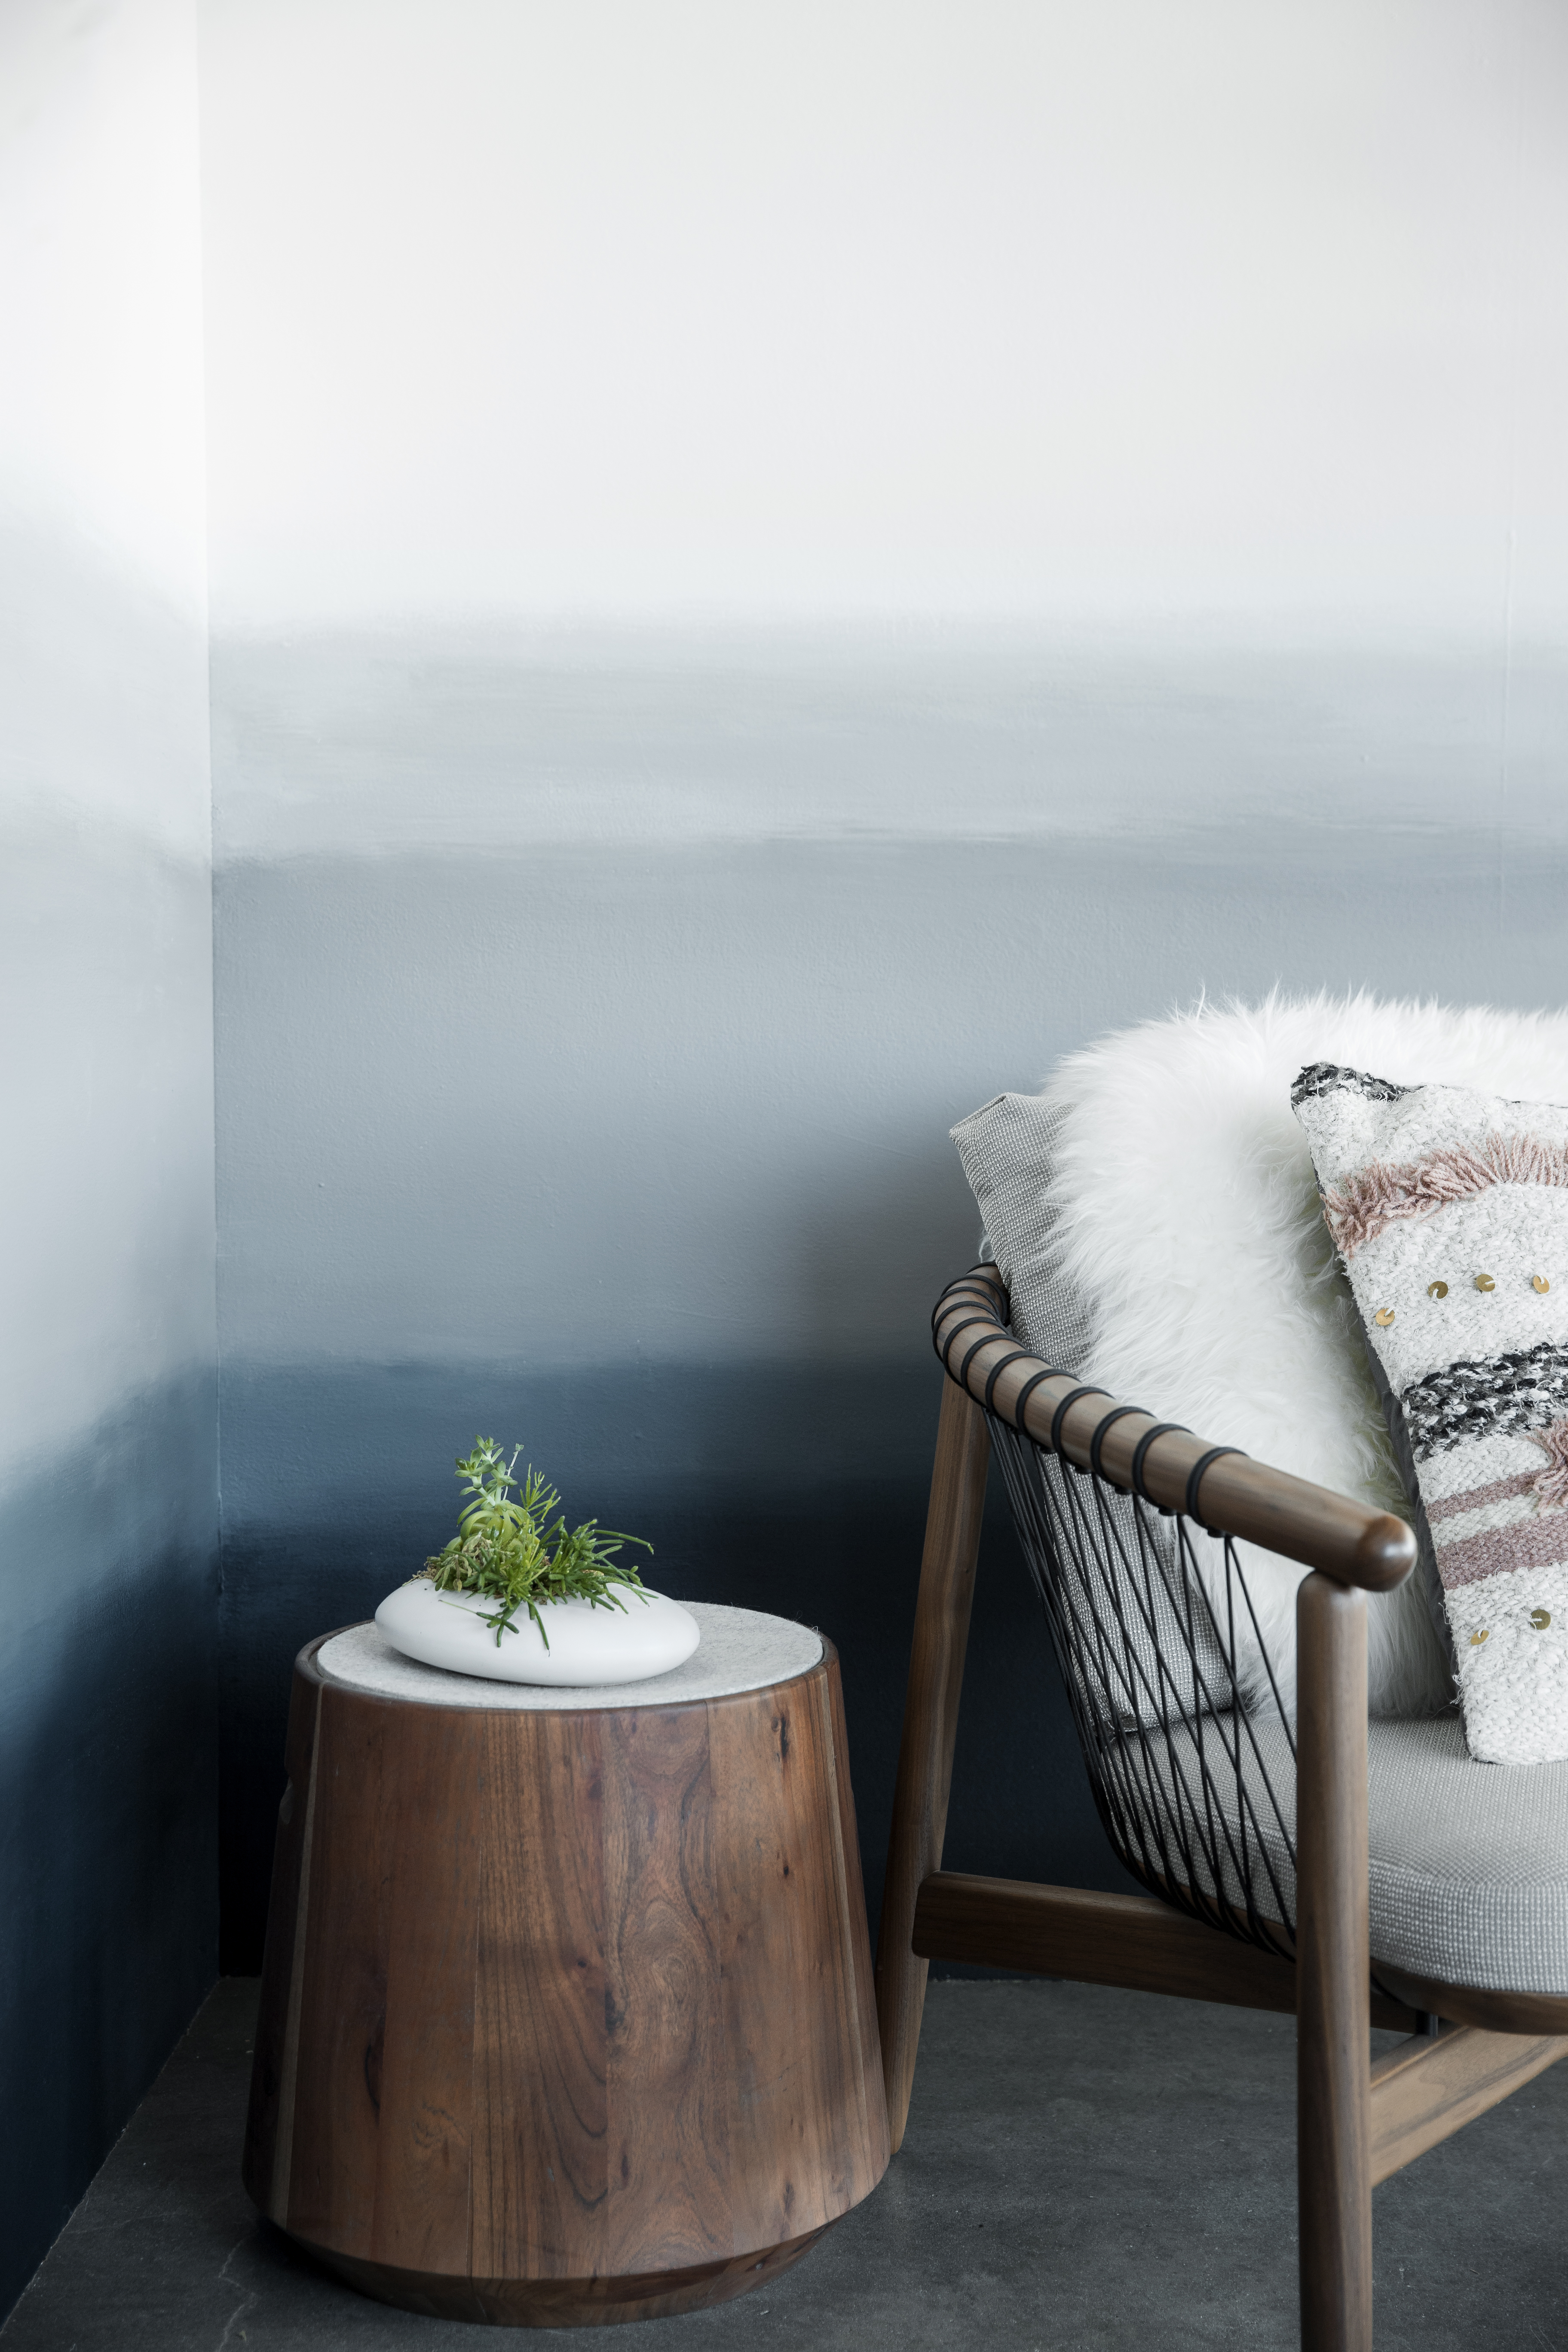 How To Paint An Ombre Wall Sunset Magazine